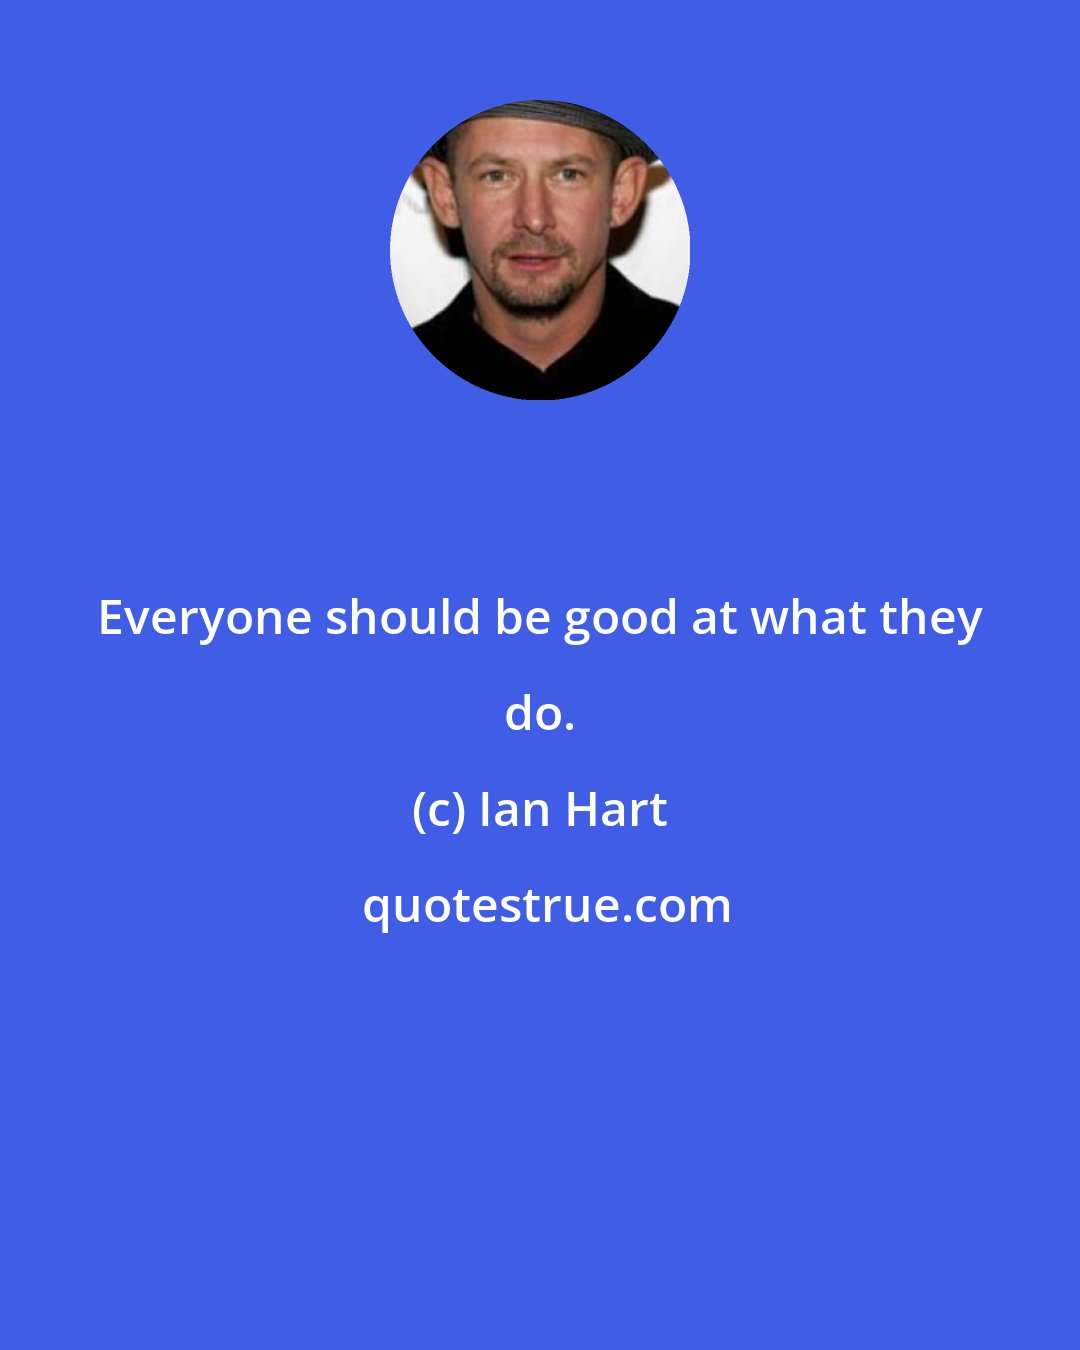 Ian Hart: Everyone should be good at what they do.